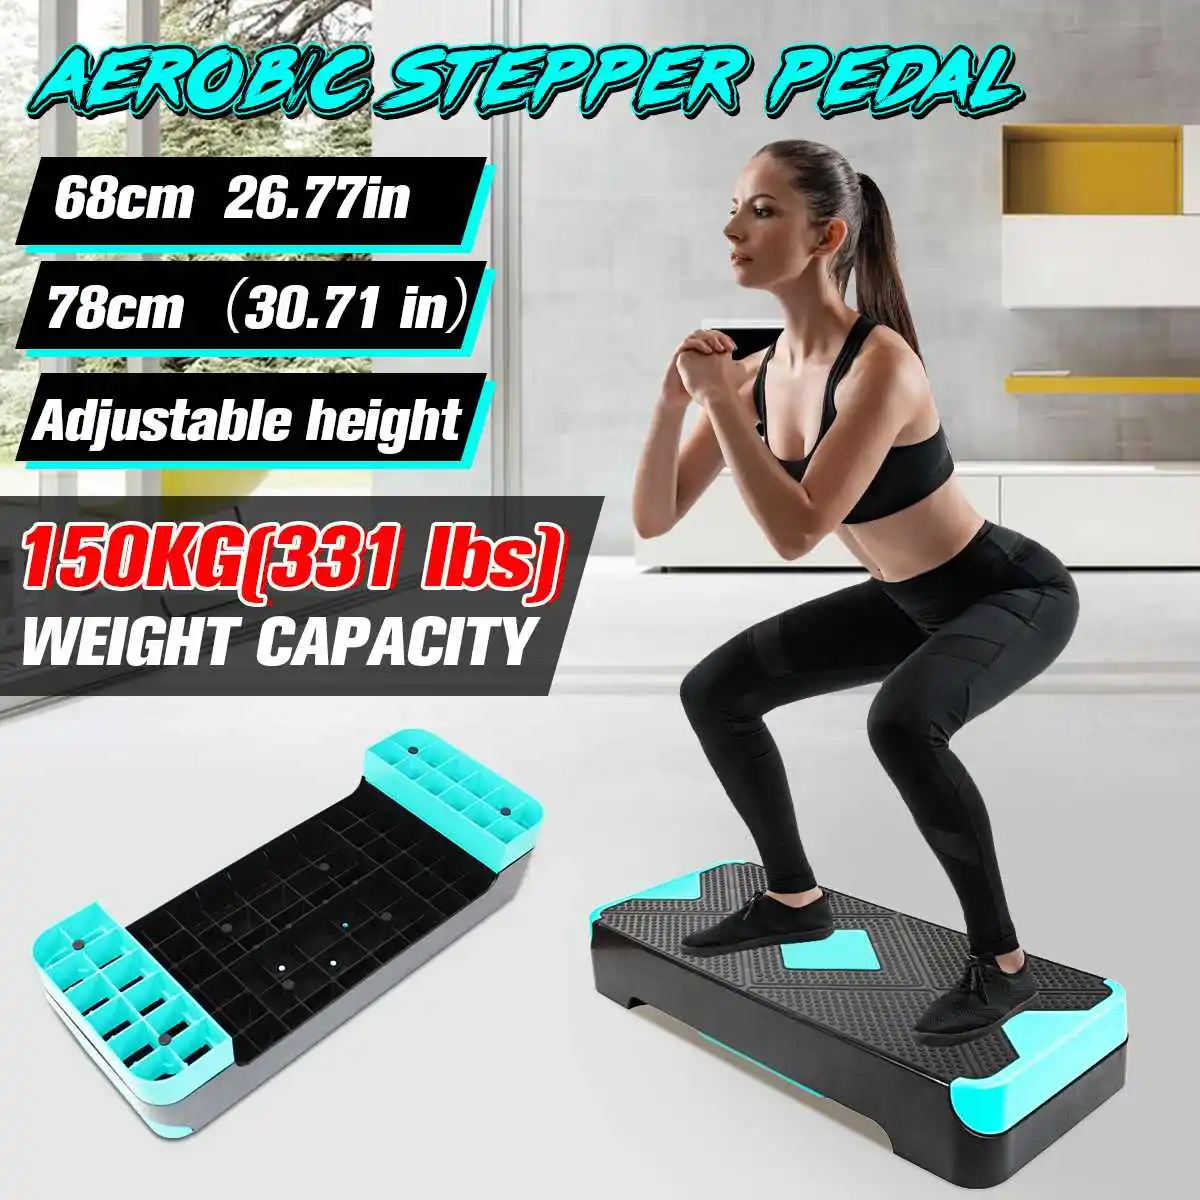 

150KG Fitness Aerobic Step Adjustable Non-slip Cardio Yoga Pedal Stepper Gym Workout Exercise Fitness Aerobic Step Equipment